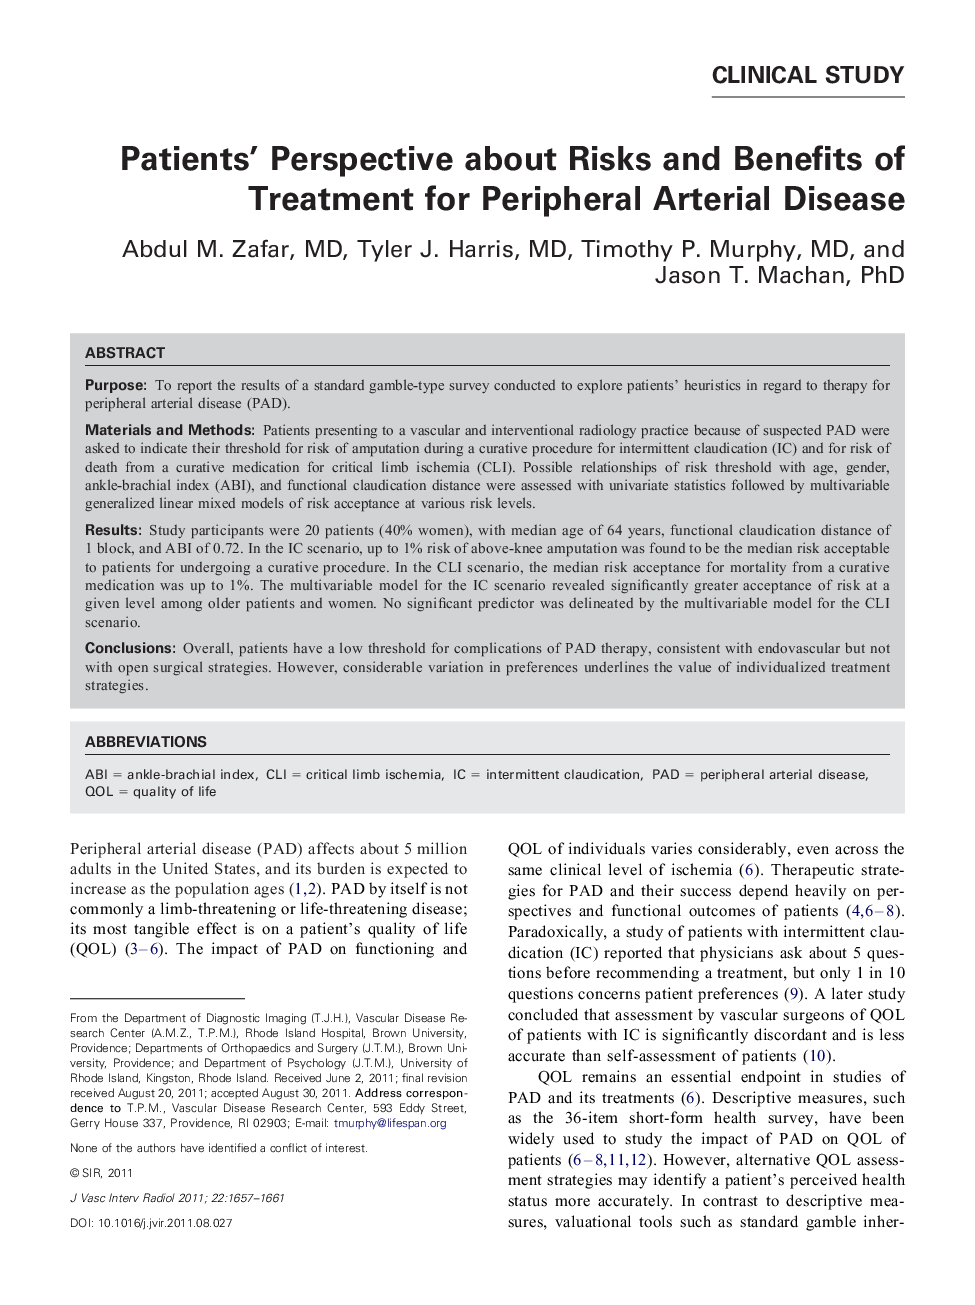 Patients' Perspective about Risks and Benefits of Treatment for Peripheral Arterial Disease